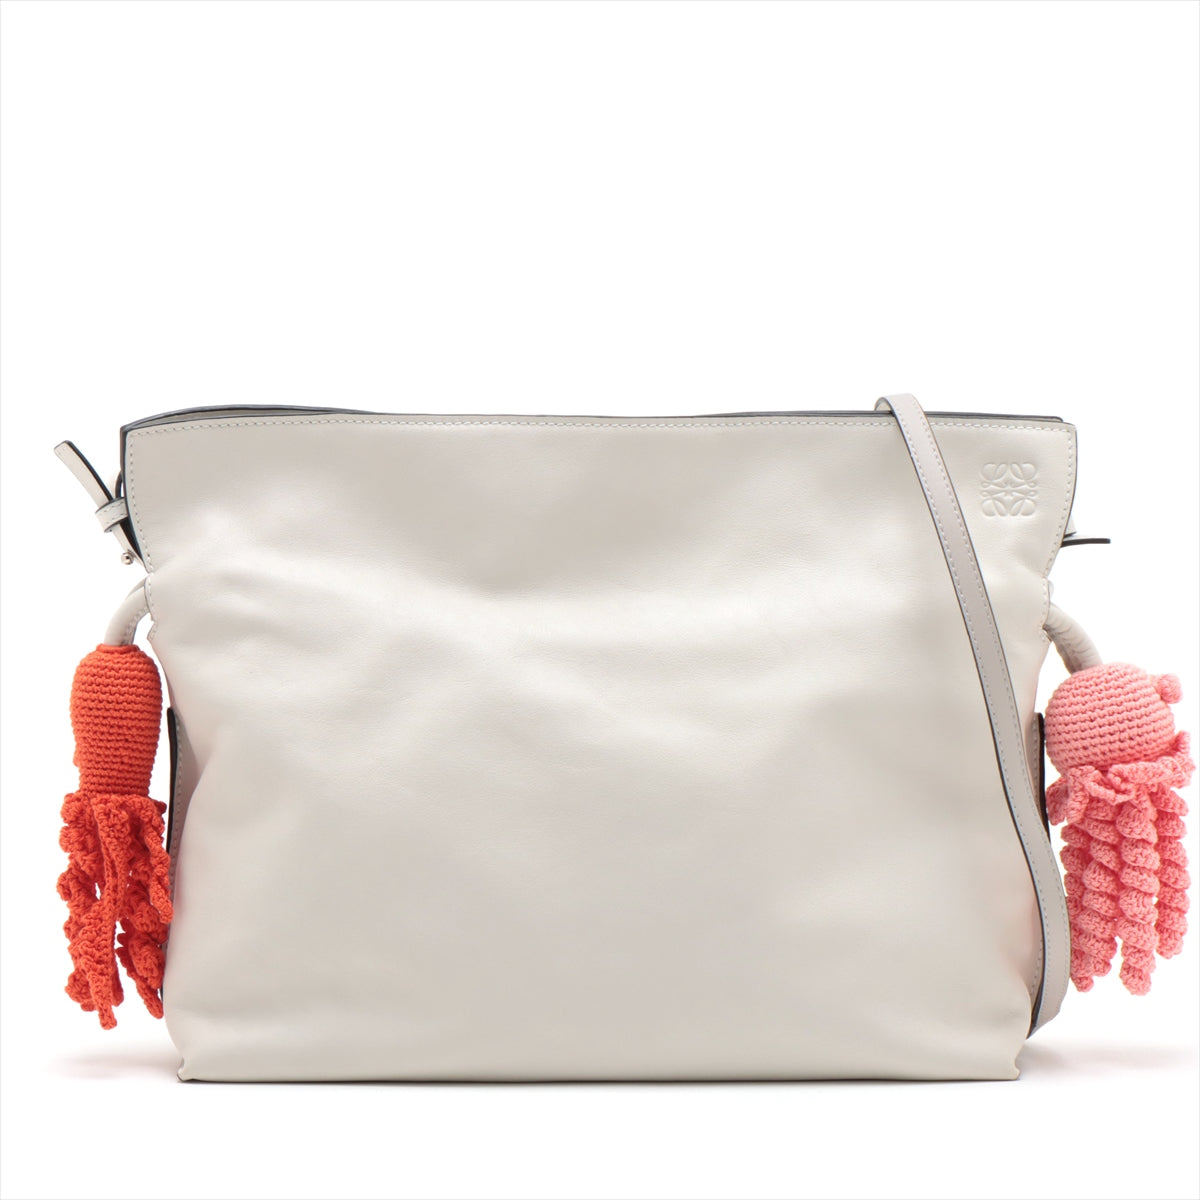 Loewee Flamenco Clutch Leather Shoulder Bag White Octopus